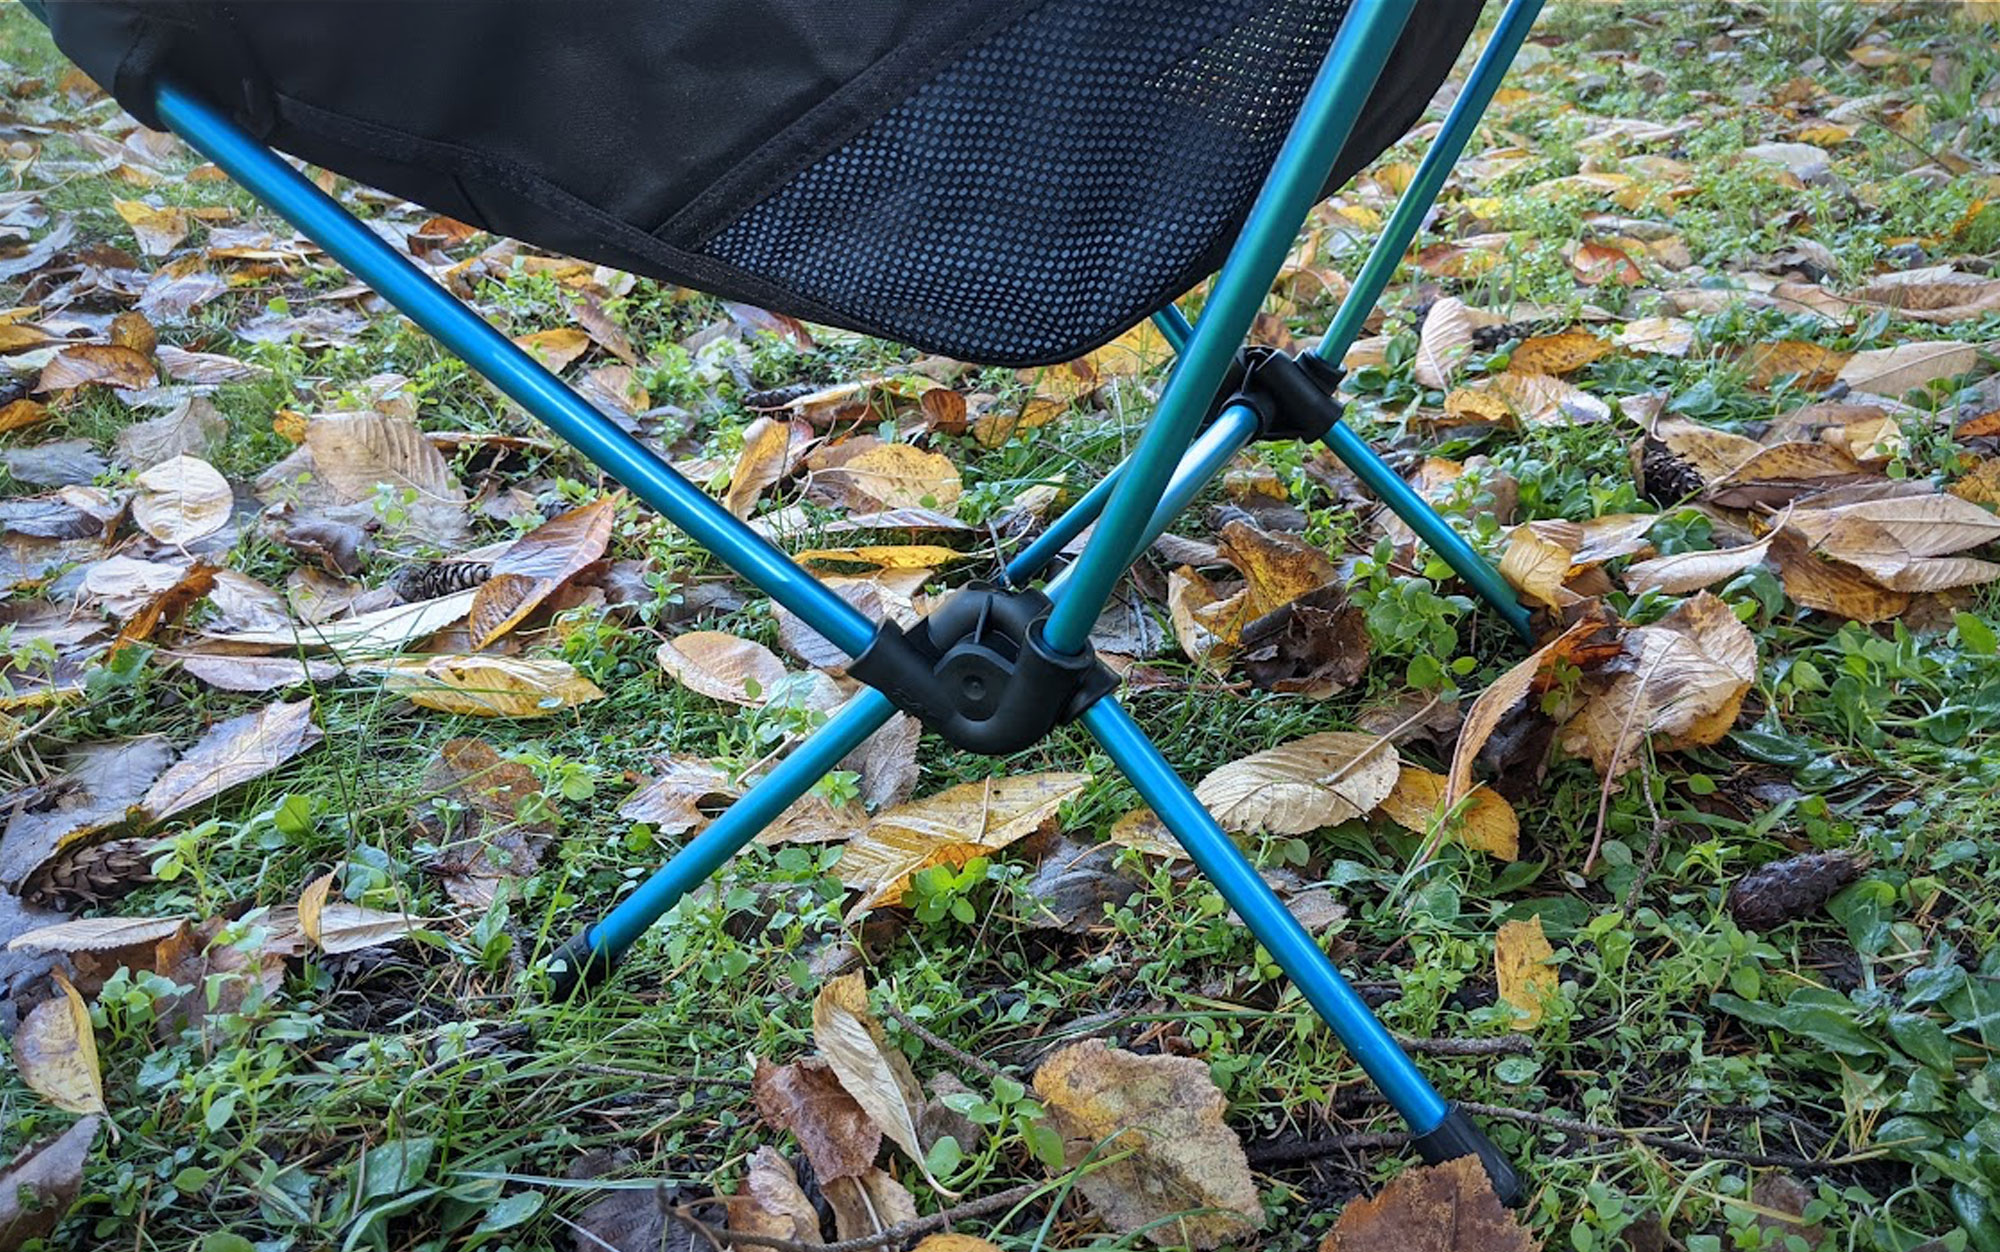 We tested the Helinox Camp 2 chair.